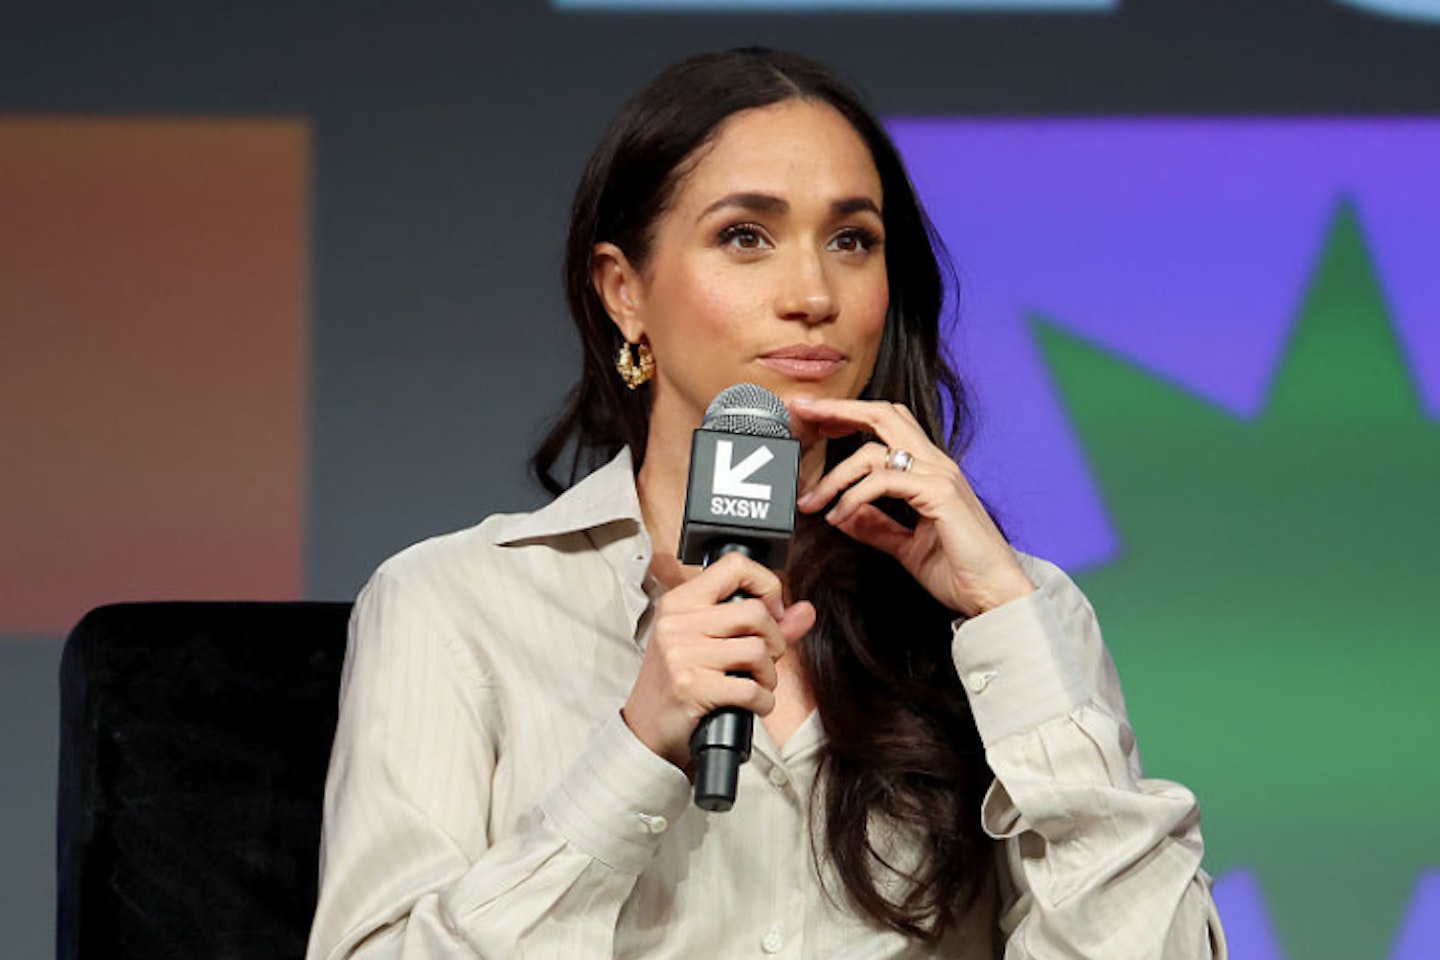 Meghan Markle holding a microphone while speaking at SXSW